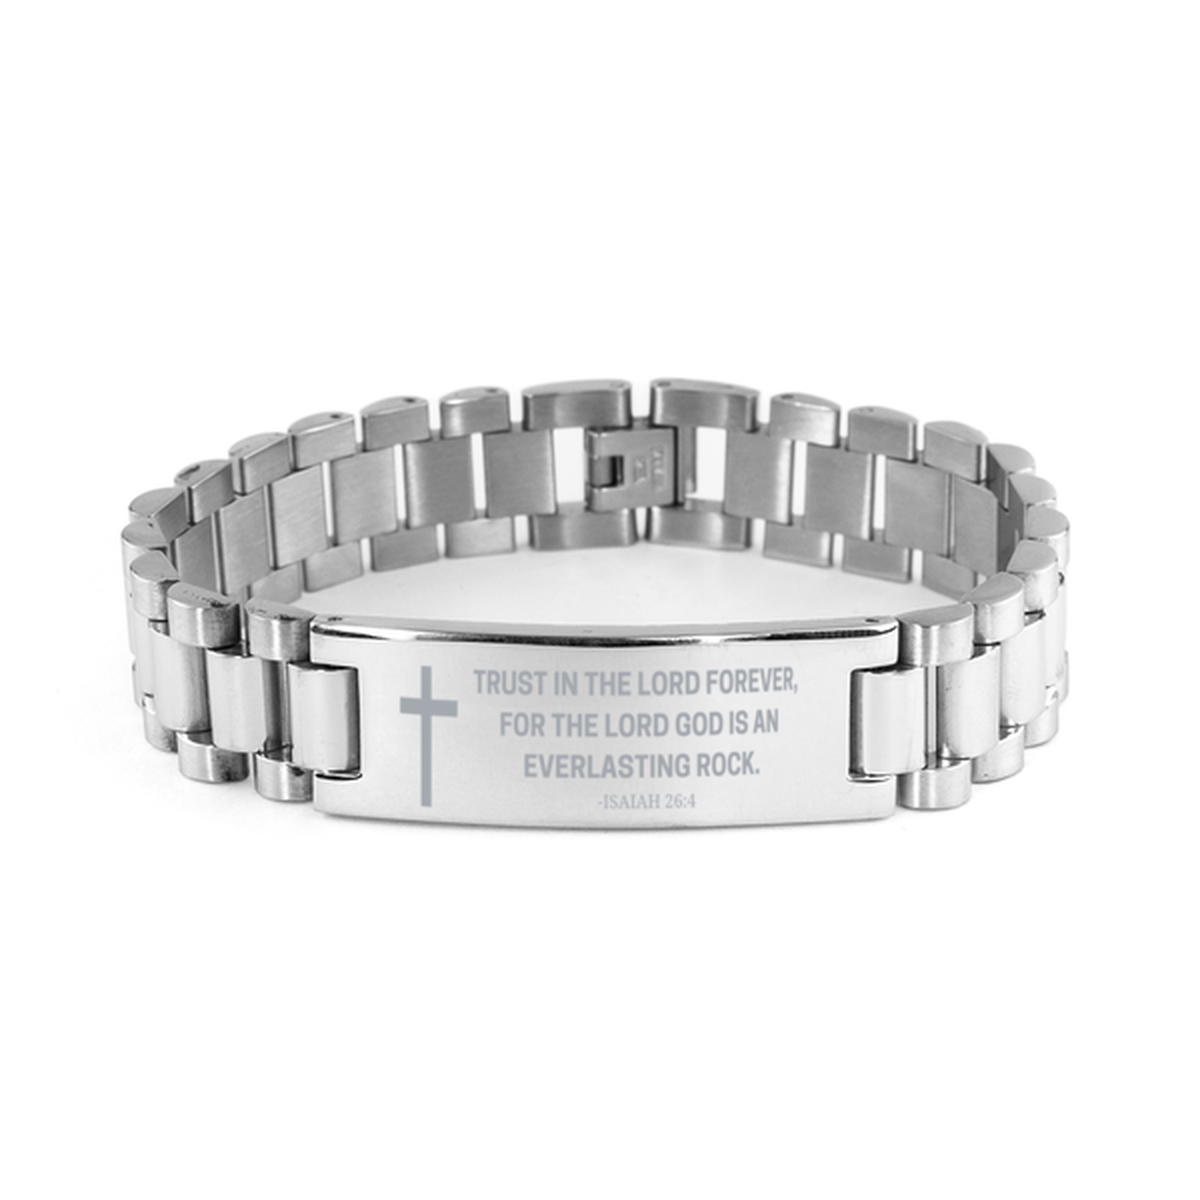 Baptism Gifts For Teenage Boys Girls, Christian Bible Verse Ladder Stainless Steel Bracelet, Trust in the Lord forever, Catholic Confirmation Gifts for Son, Godson, Grandson, Nephew